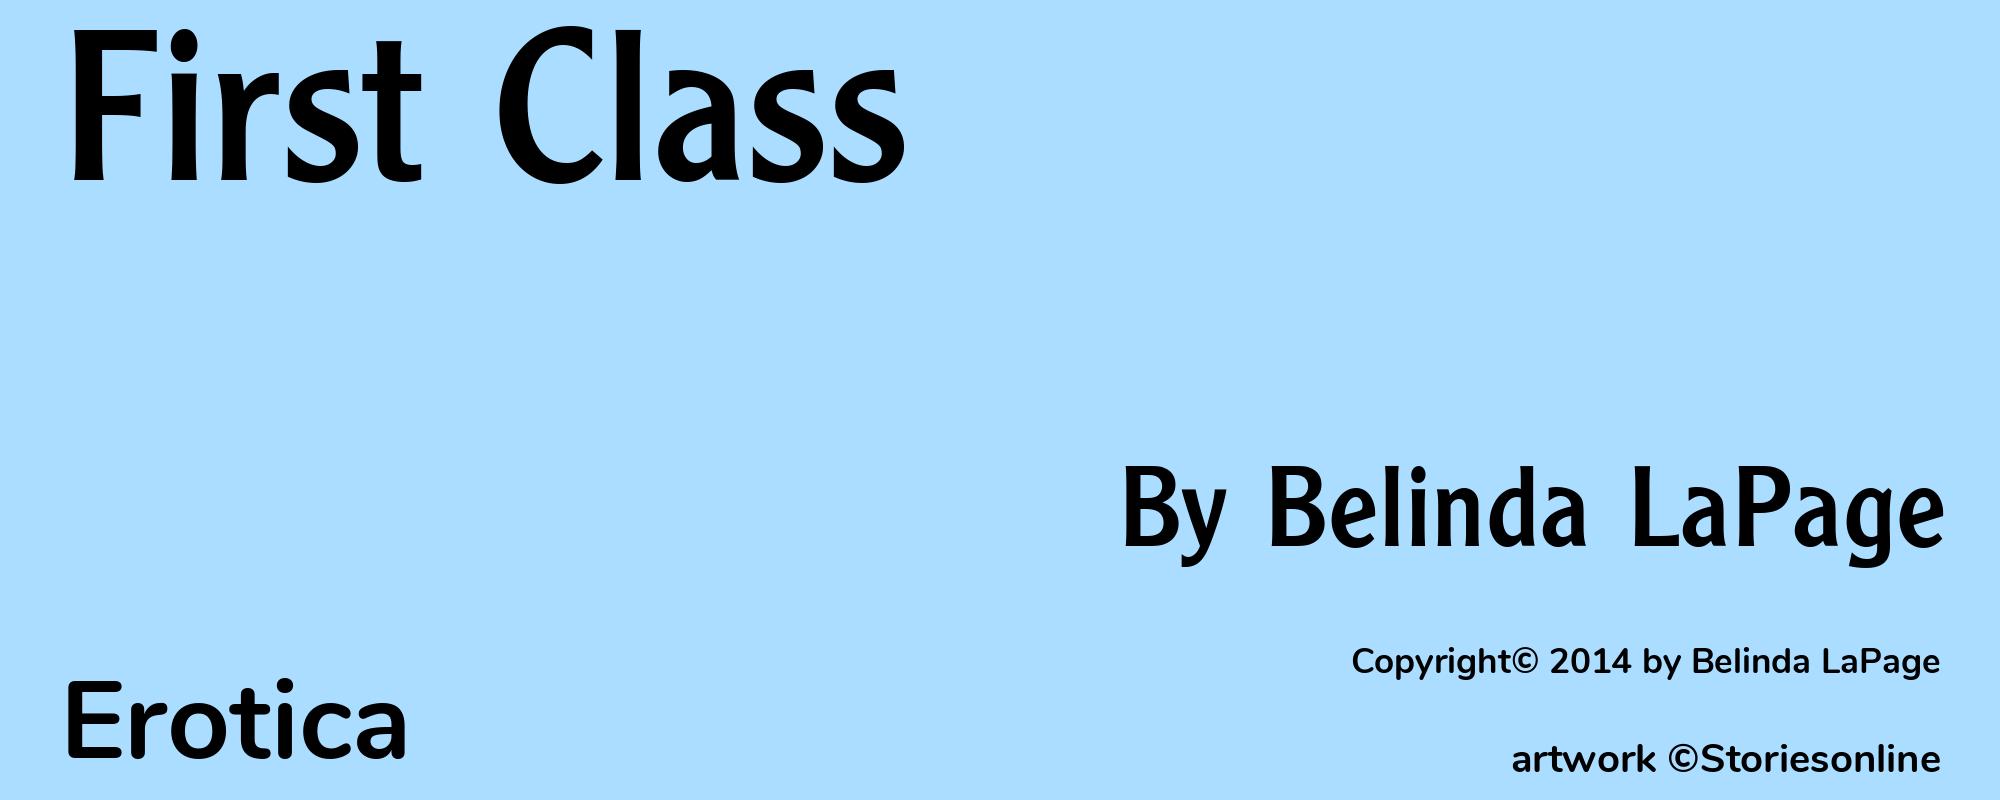 First Class - Cover